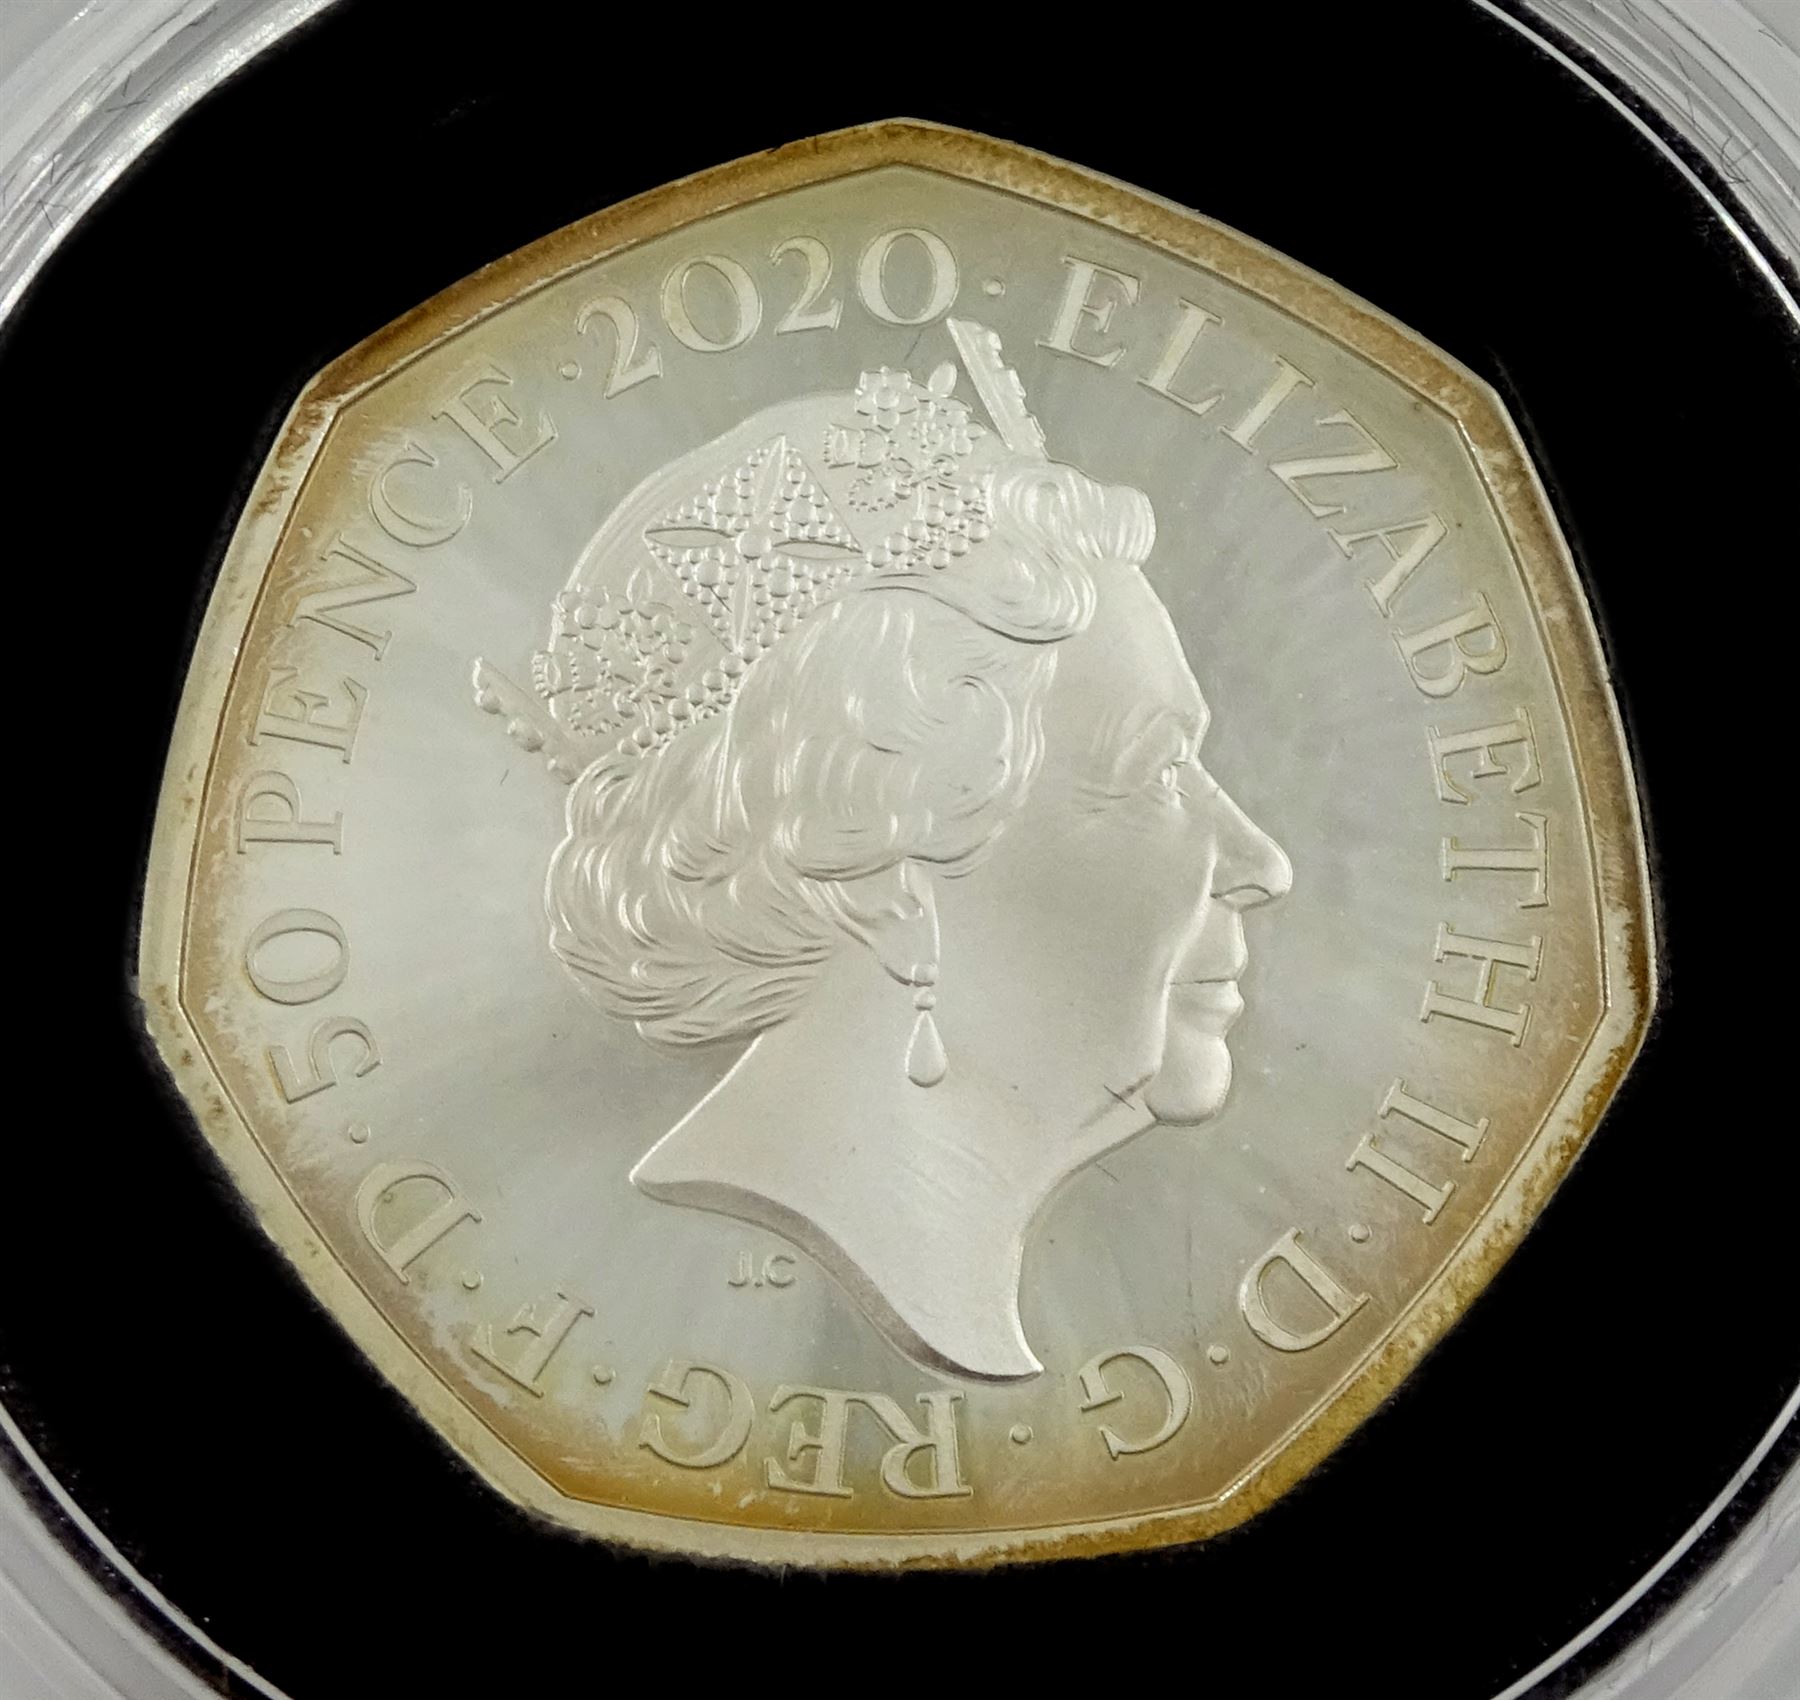 The Royal Mint 2020 'Withdrawal from the European Union' United Kingdom silver proof fifty pence coi - Image 3 of 5